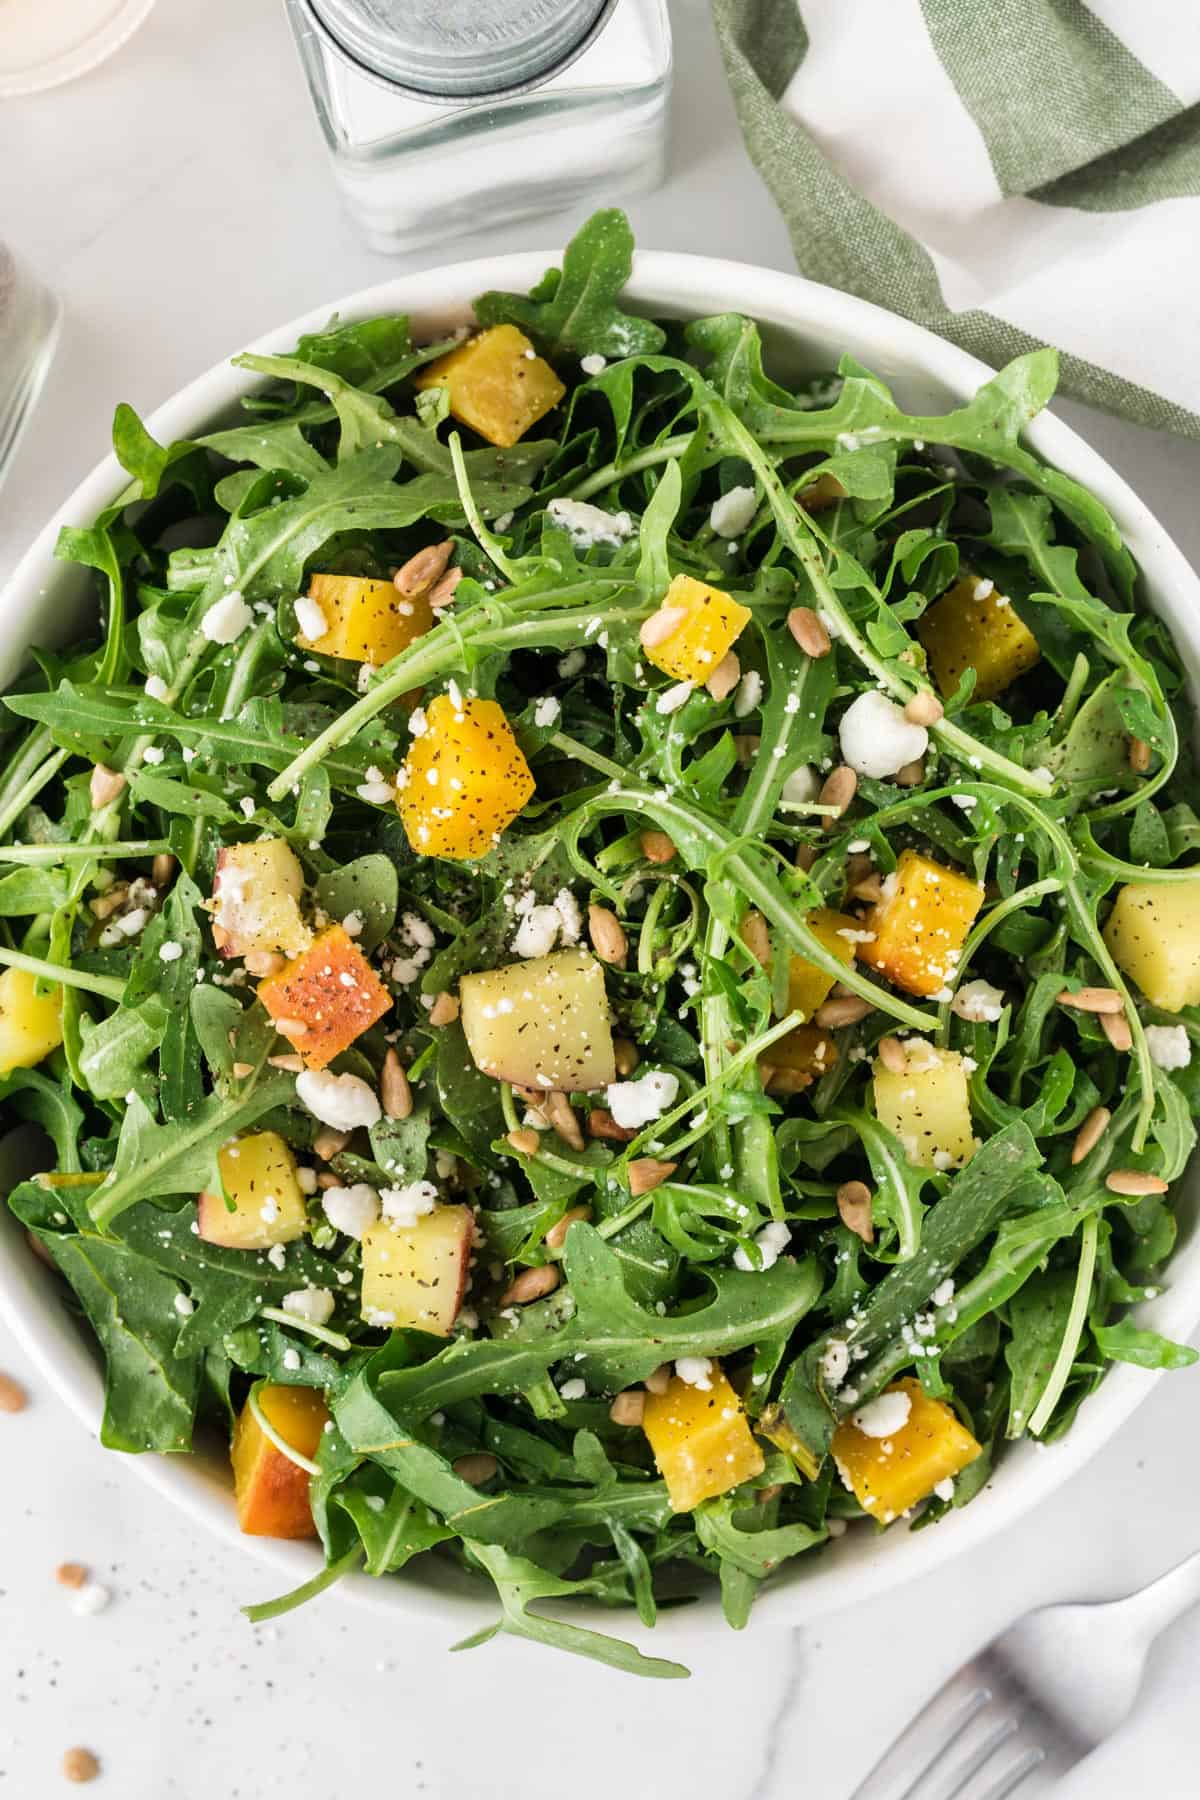 A close up picture of a salad with arugula and golden beets